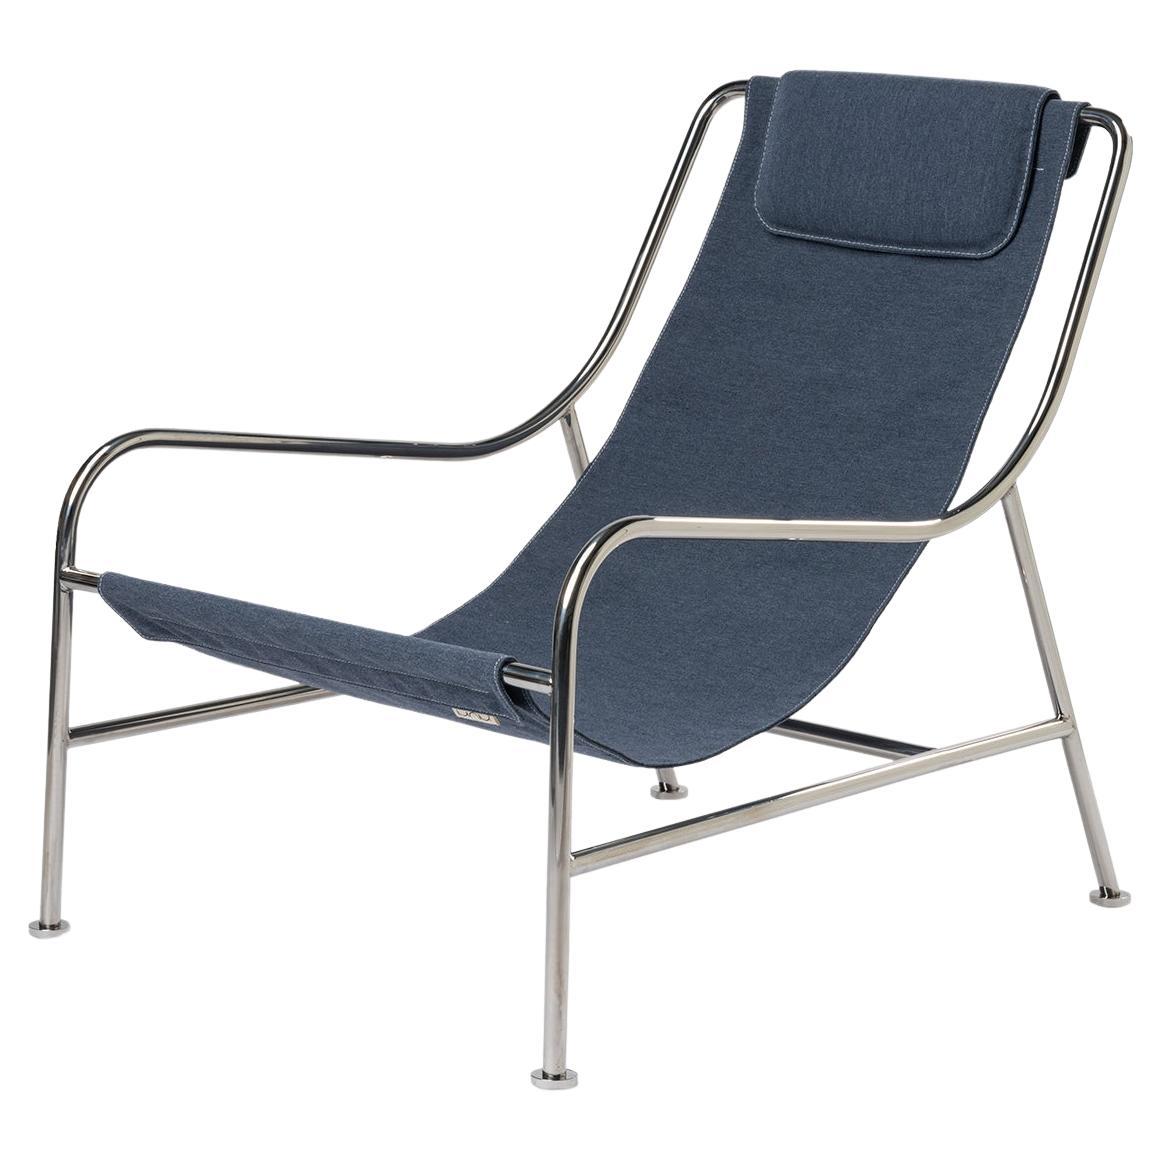 Minimalist Outdoor Lounge Chair in "Sky" Fabric and Brushed Stainless Steel